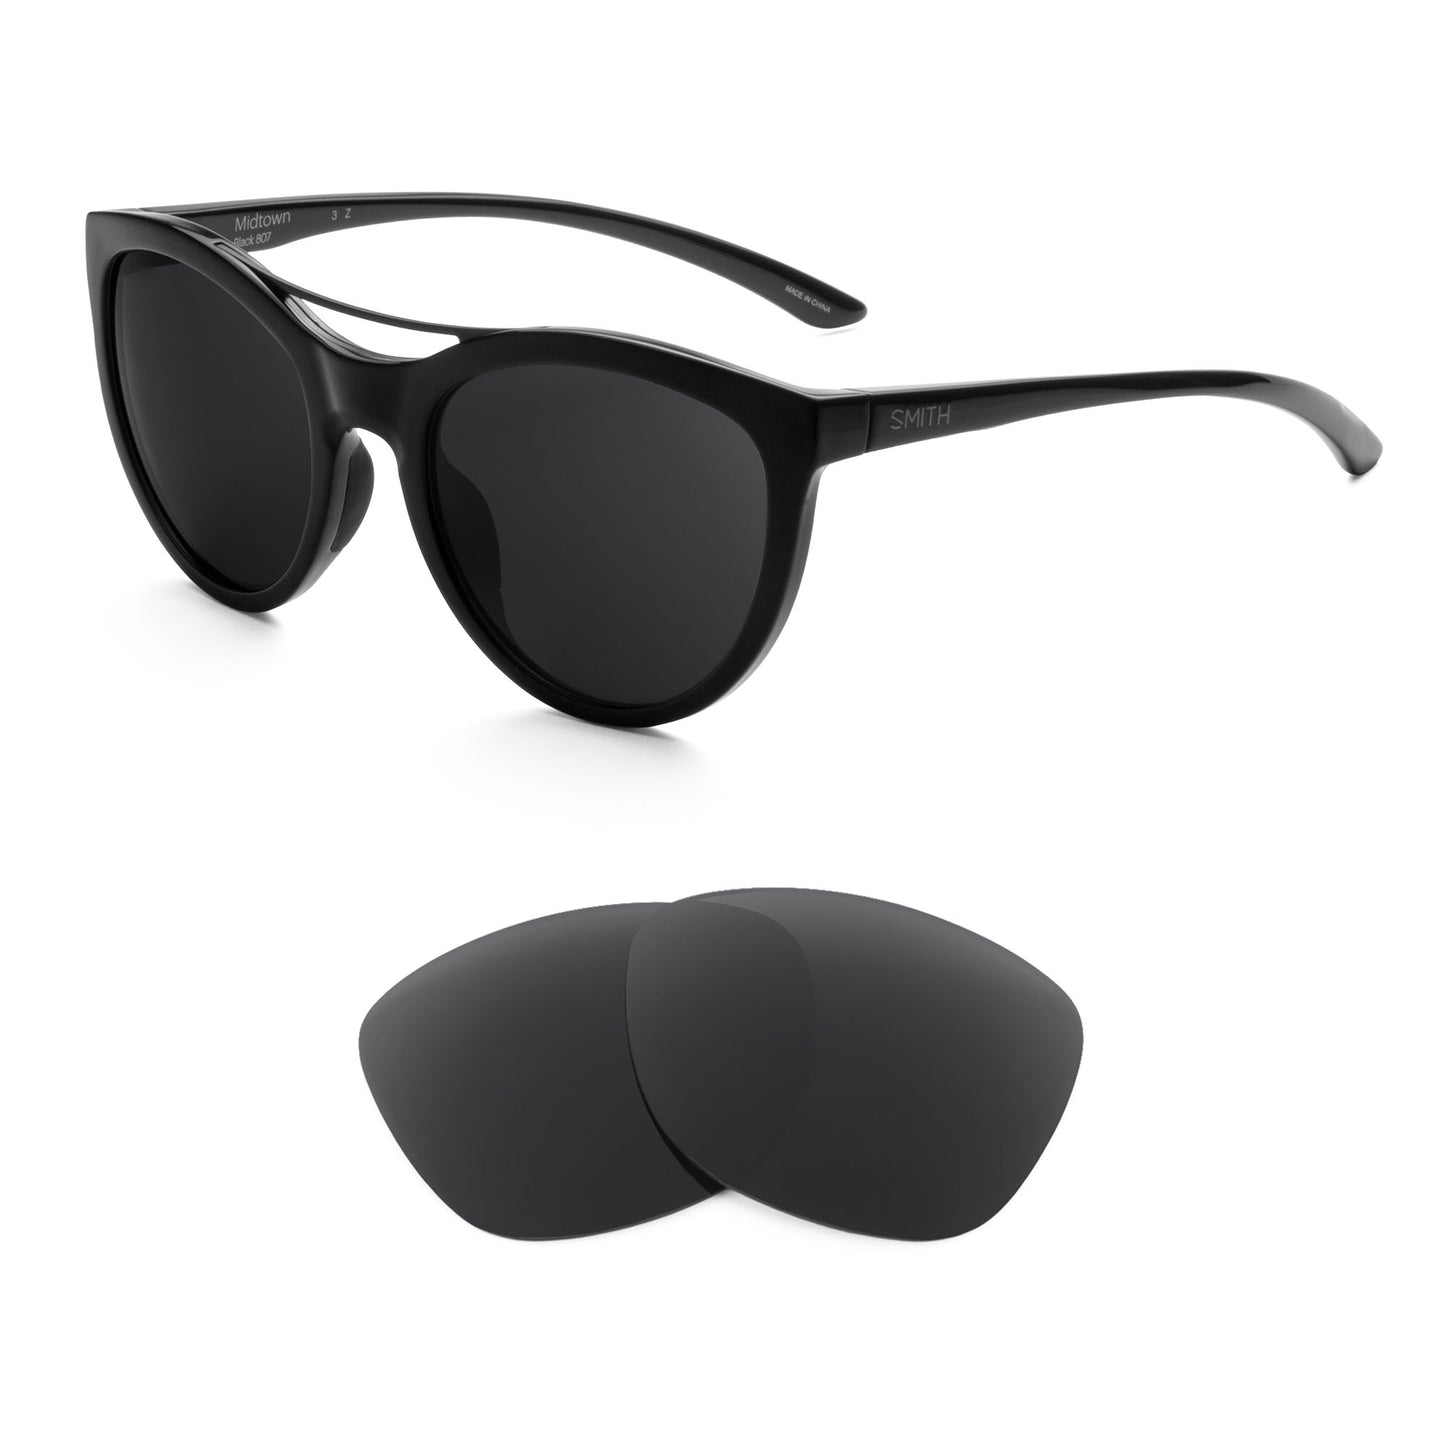 Smith Midtown sunglasses with replacement lenses